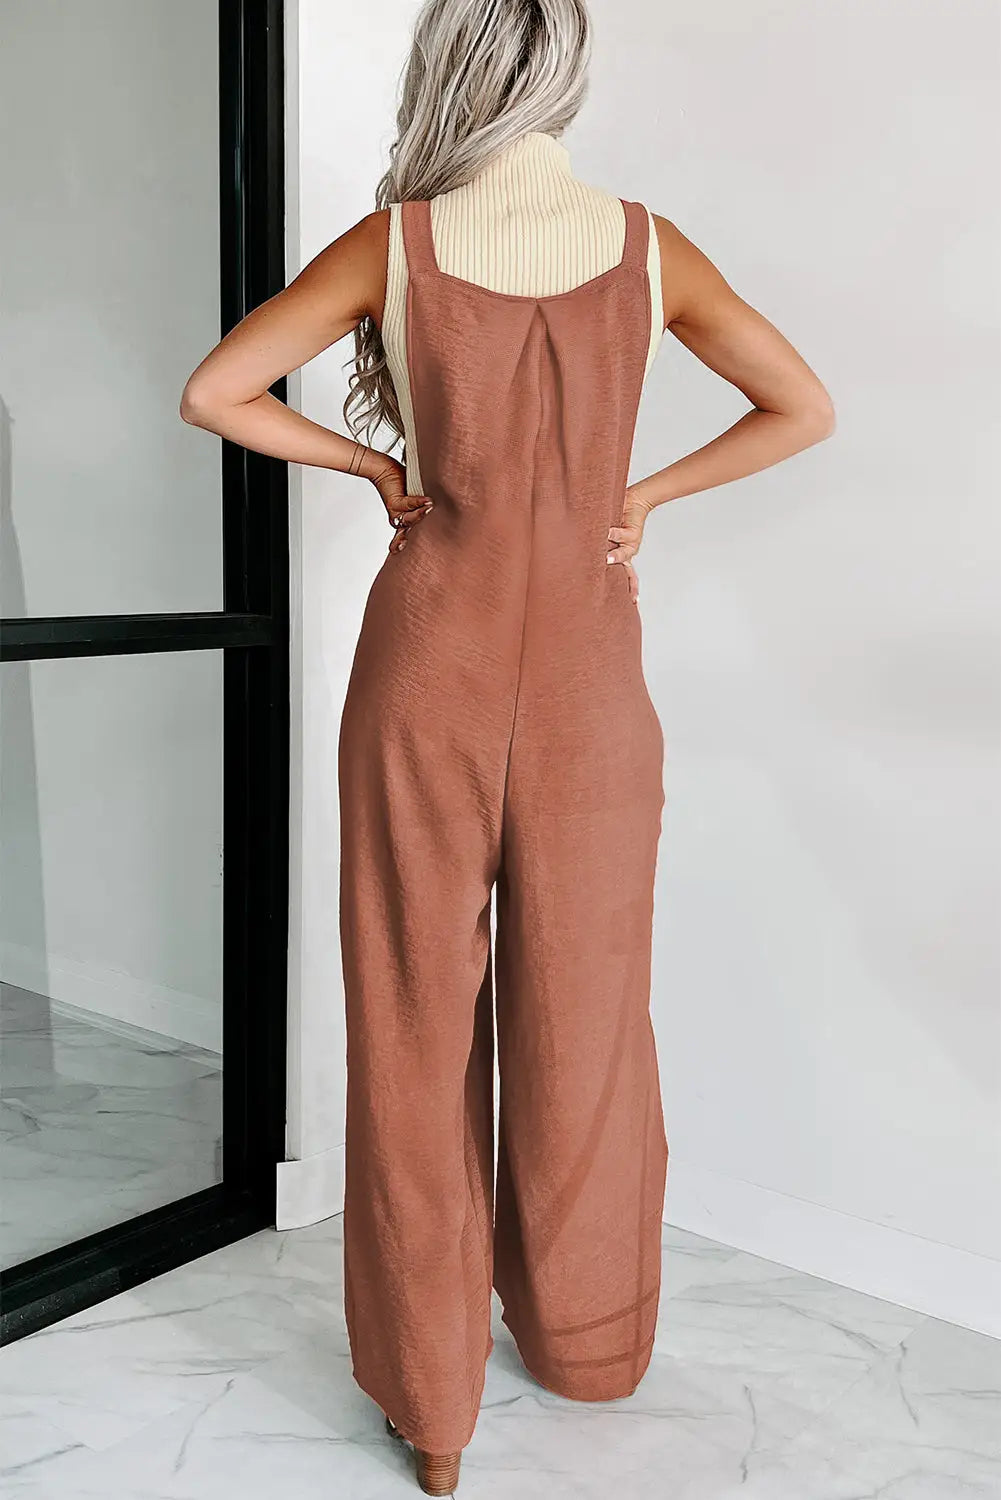 Black textured buttoned straps ruched wide leg jumpsuit - jumpsuits & rompers